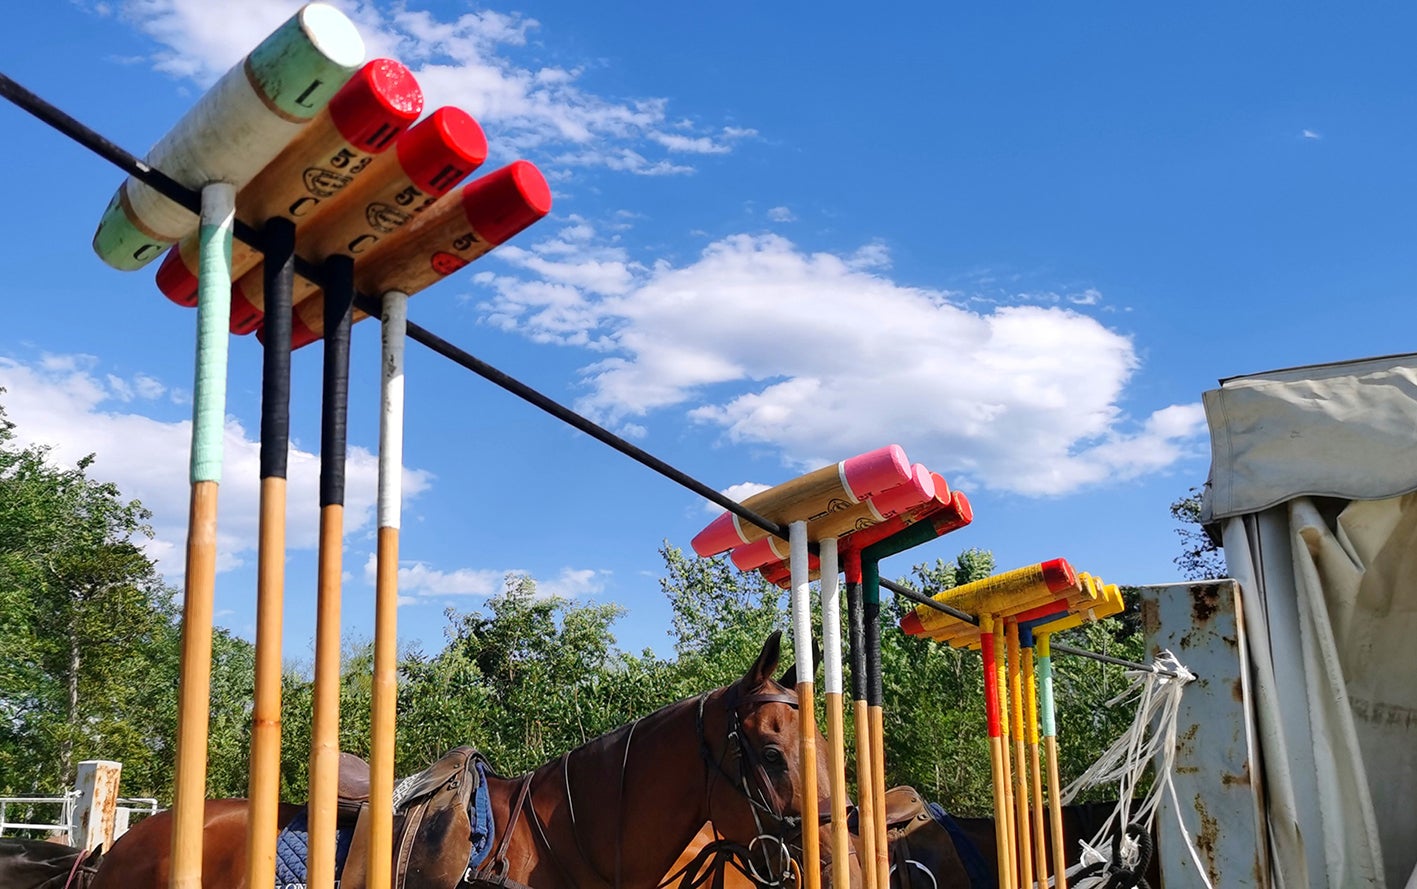 Polo mallets hang against the backdrop of a beautiful blue sky in Tianjin